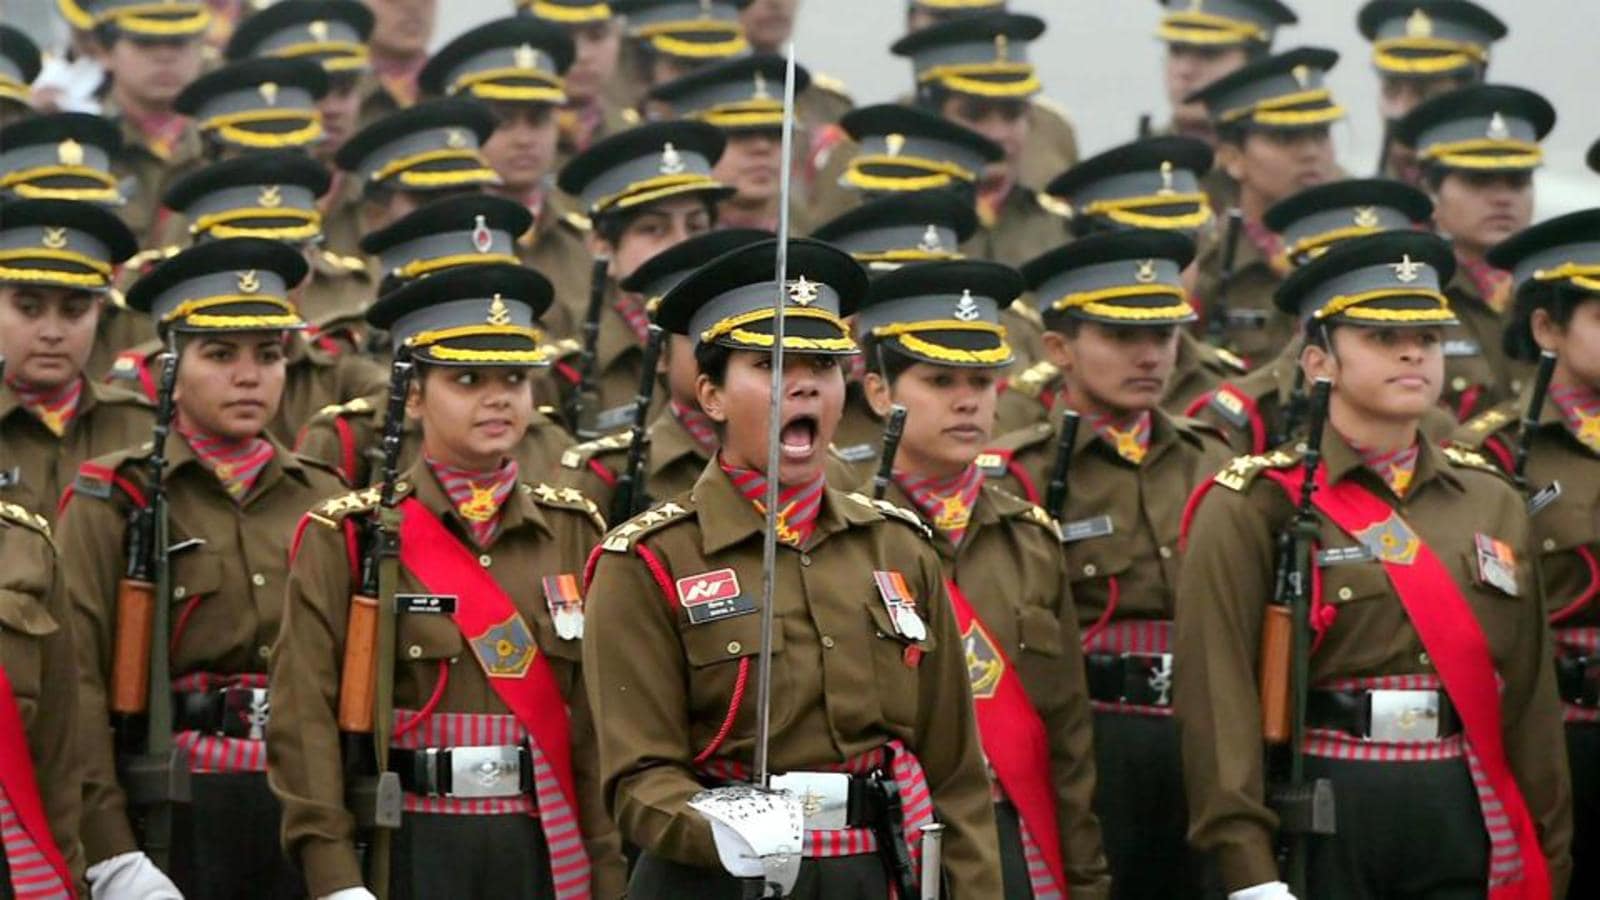 Indian Army Girl Sex - Needed: Gender inclusivity in the Indian armed forces - Hindustan Times